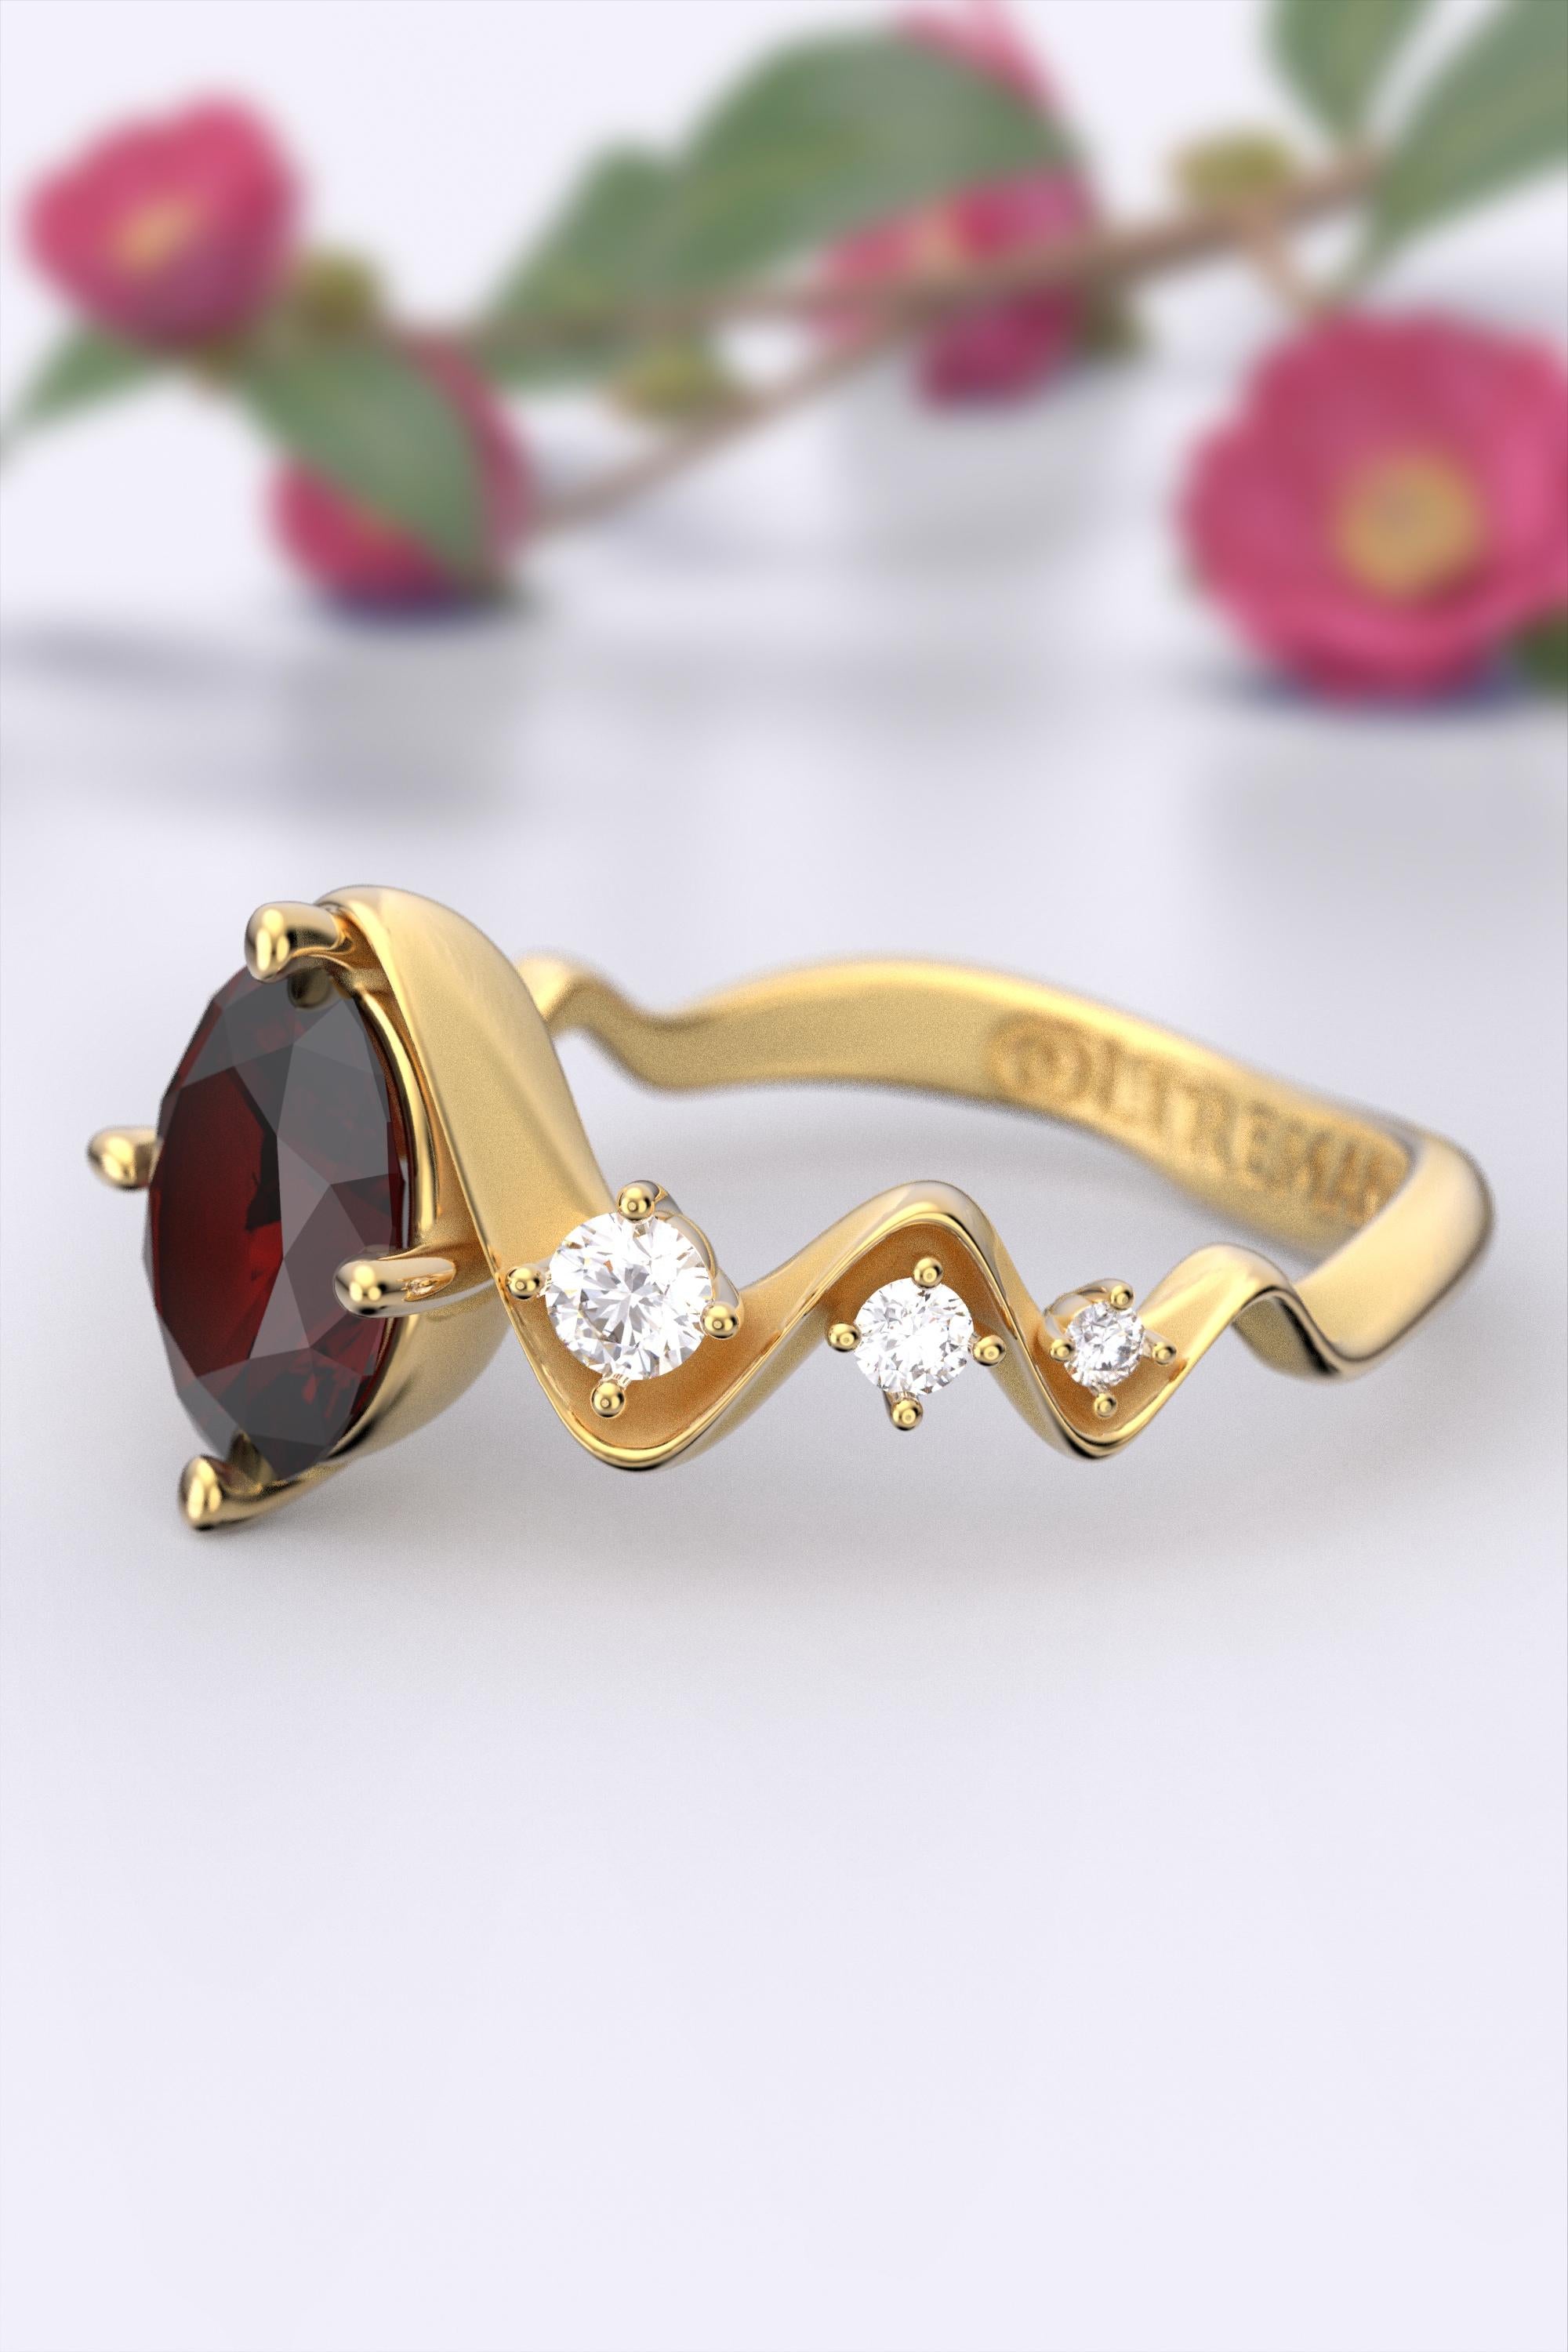 For Sale:  Garnet and Diamonds Engagement Ring Made in Italy by Oltremare Gioielli 18k Gold 10